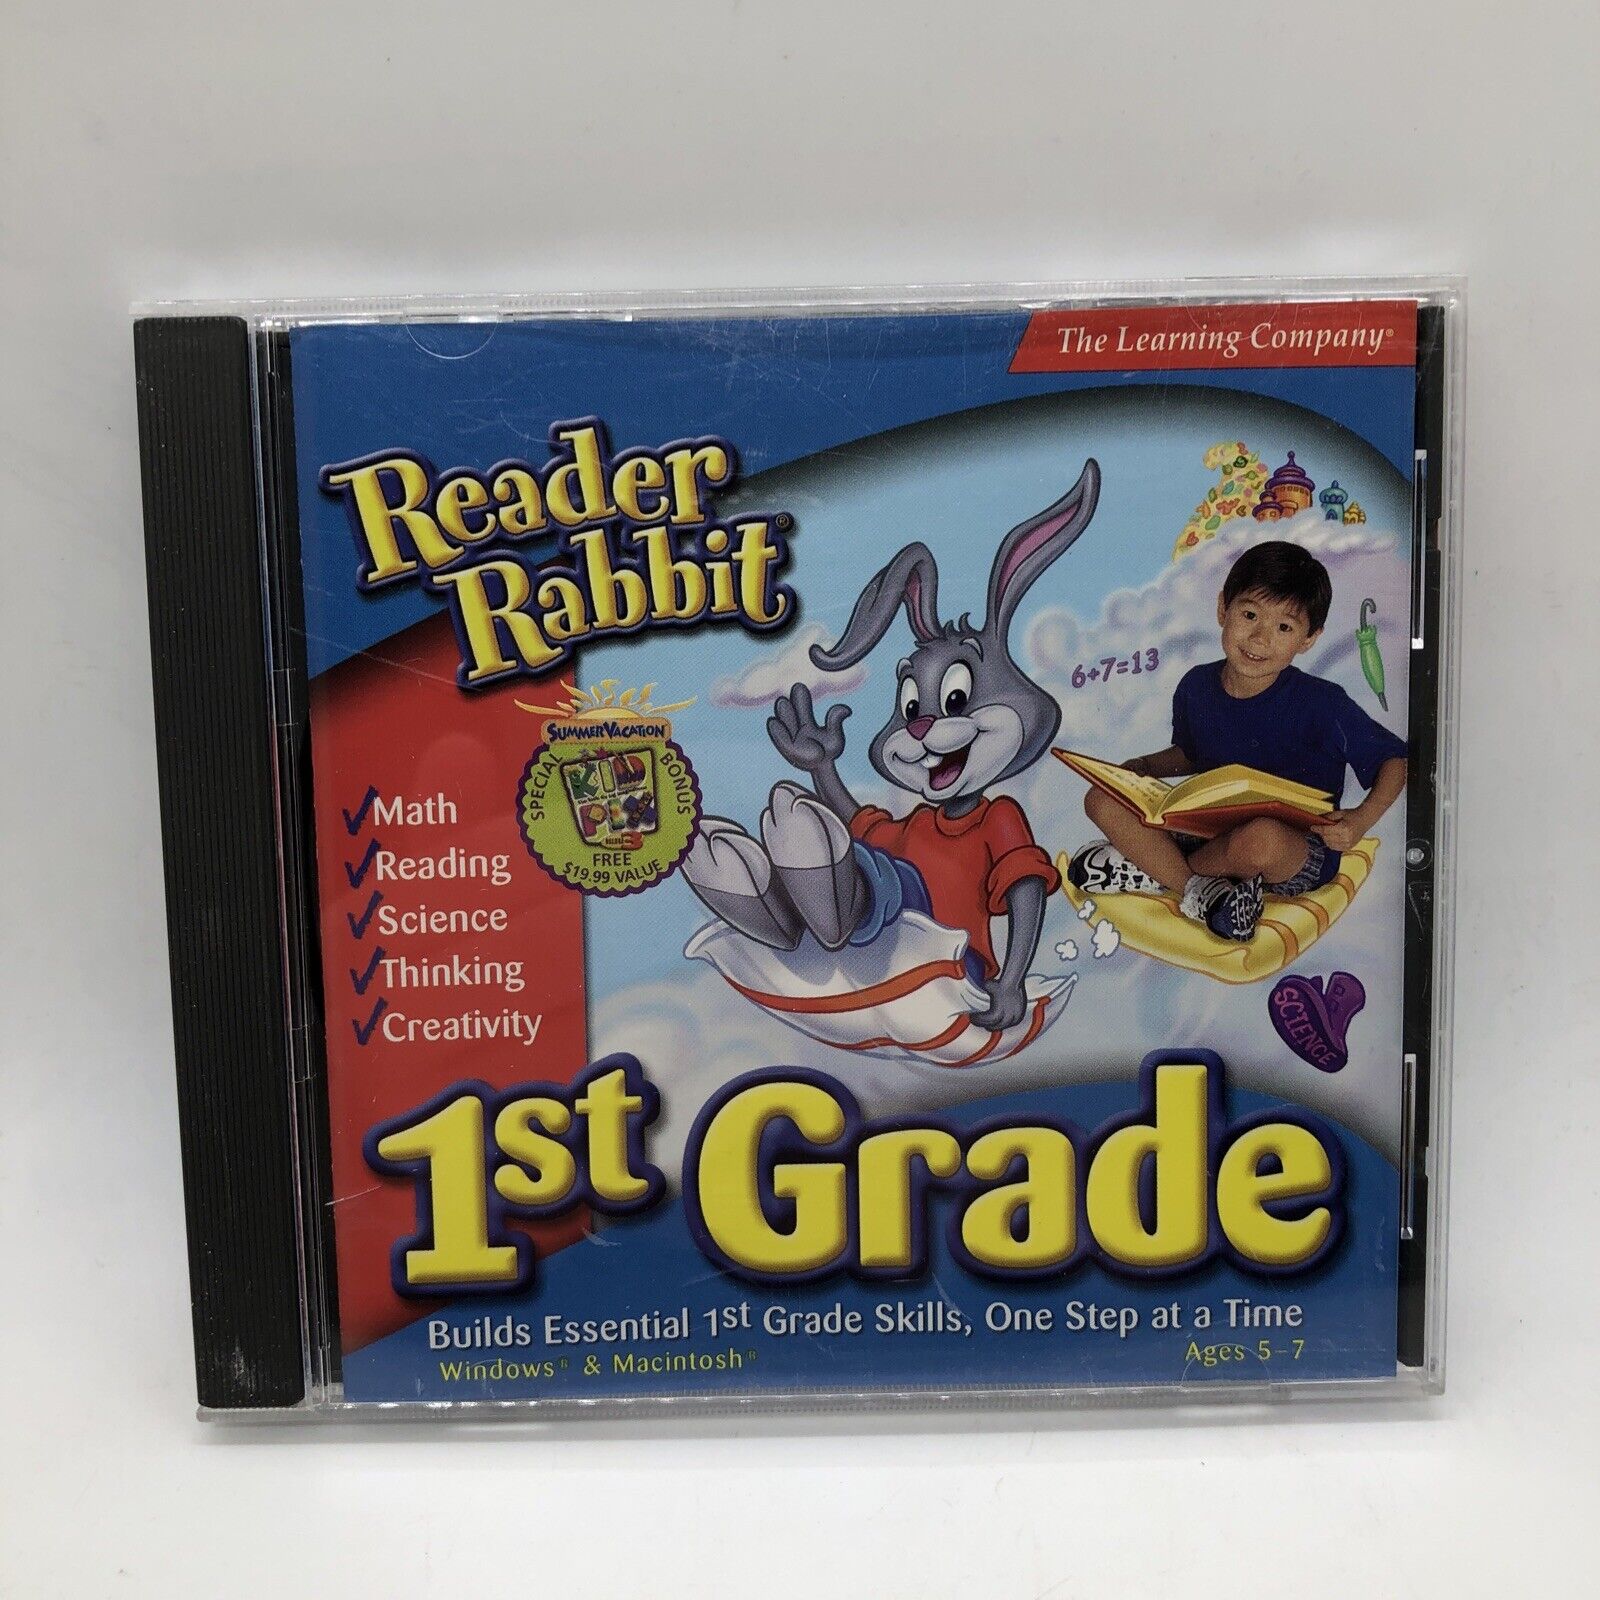 2002 Reader Rabbit 1st Grade RiverDeep The Learning Company Software CD